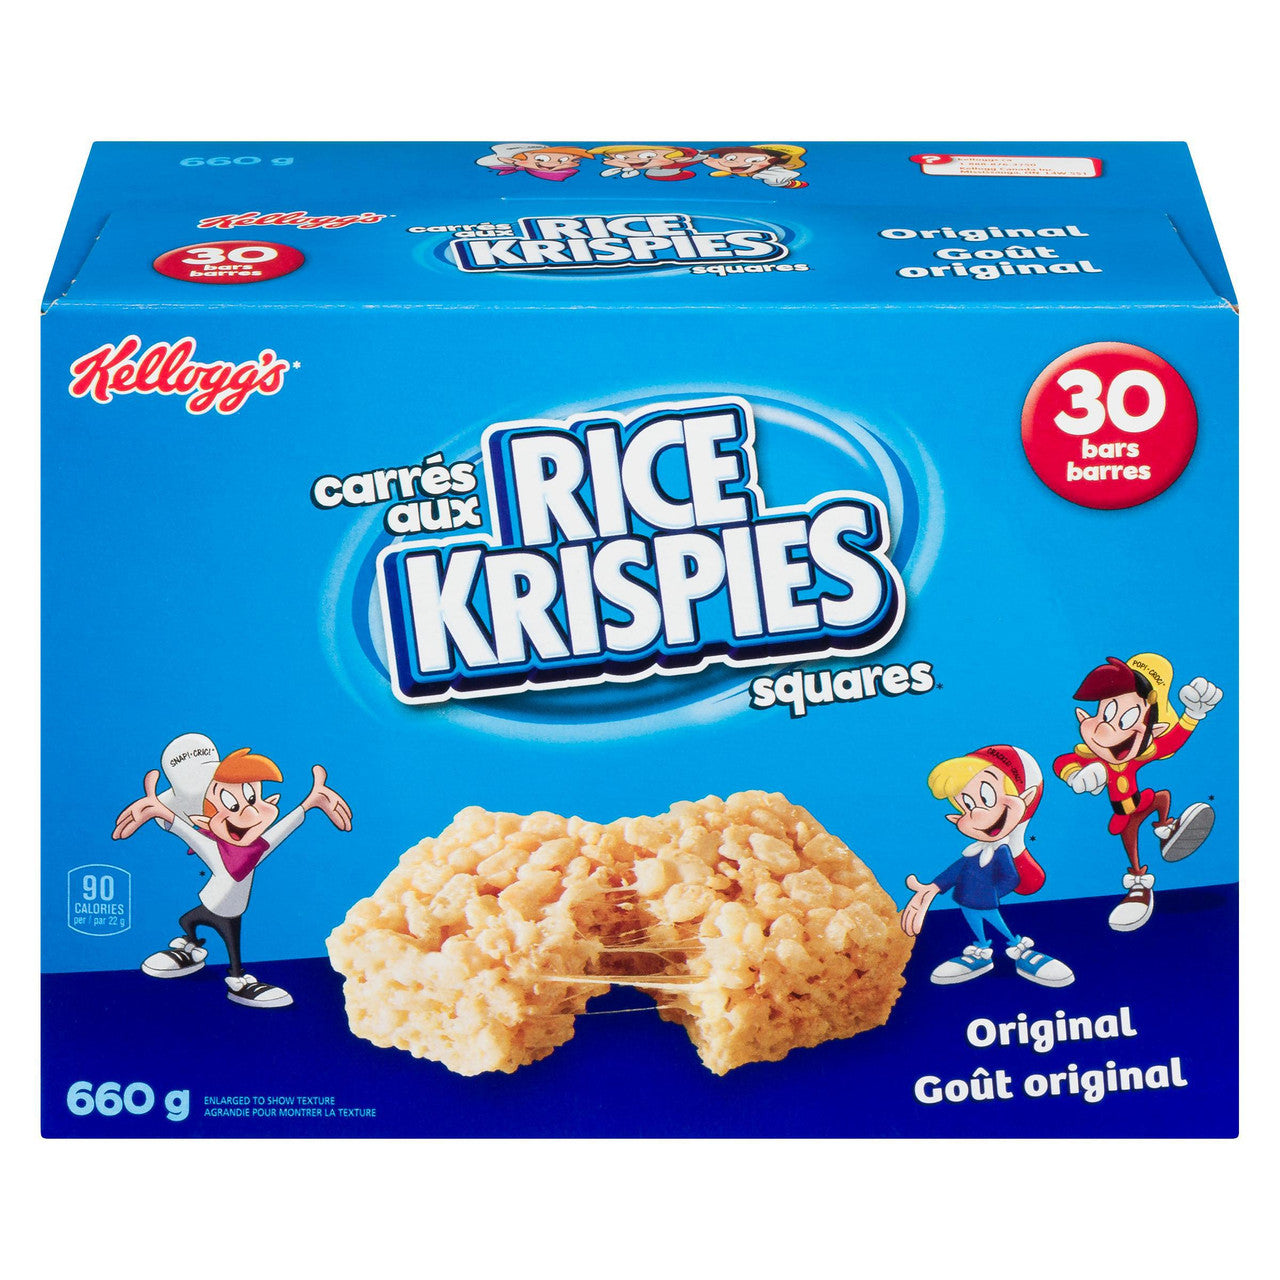 Kellogg's Rice Krispies Square Bars 660g/23.3 oz., Jumbo Pack-Original, 30ct (2 Pack) {Imported from Canada}